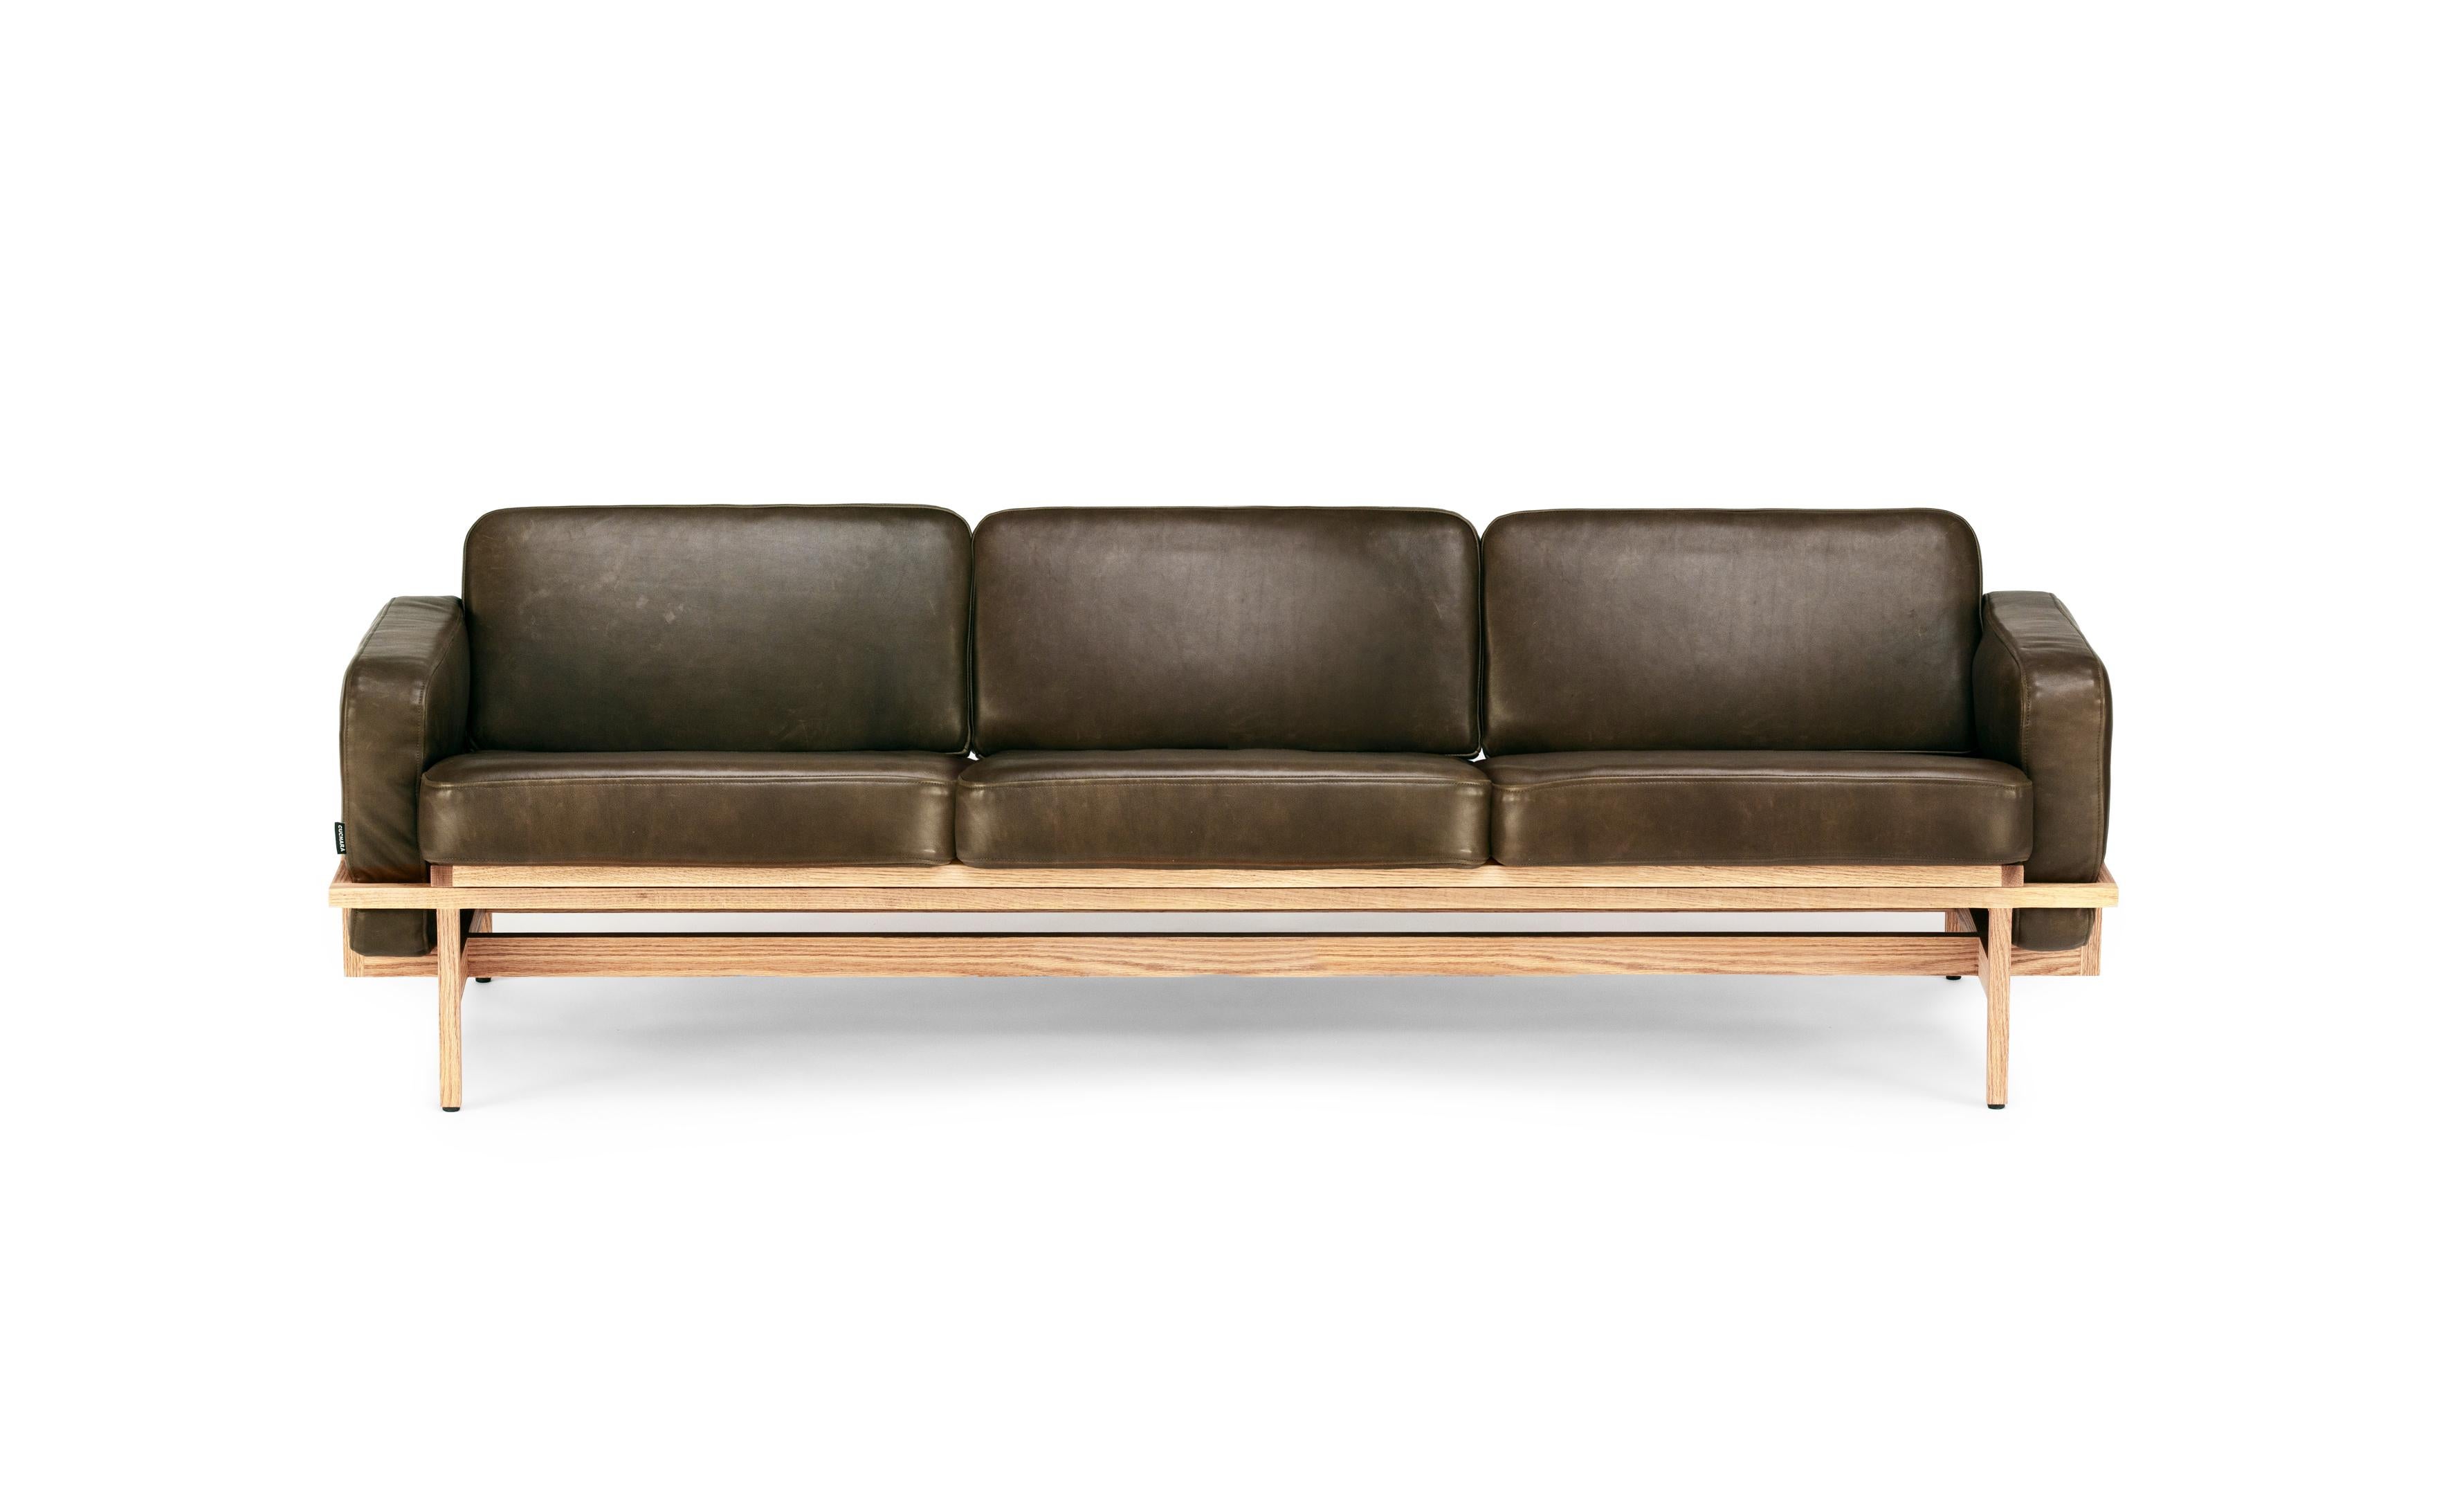 Modern Tres Plazas Lccc, Mexican Contemporary Sofa by Emiliano Molina for Cuchara For Sale